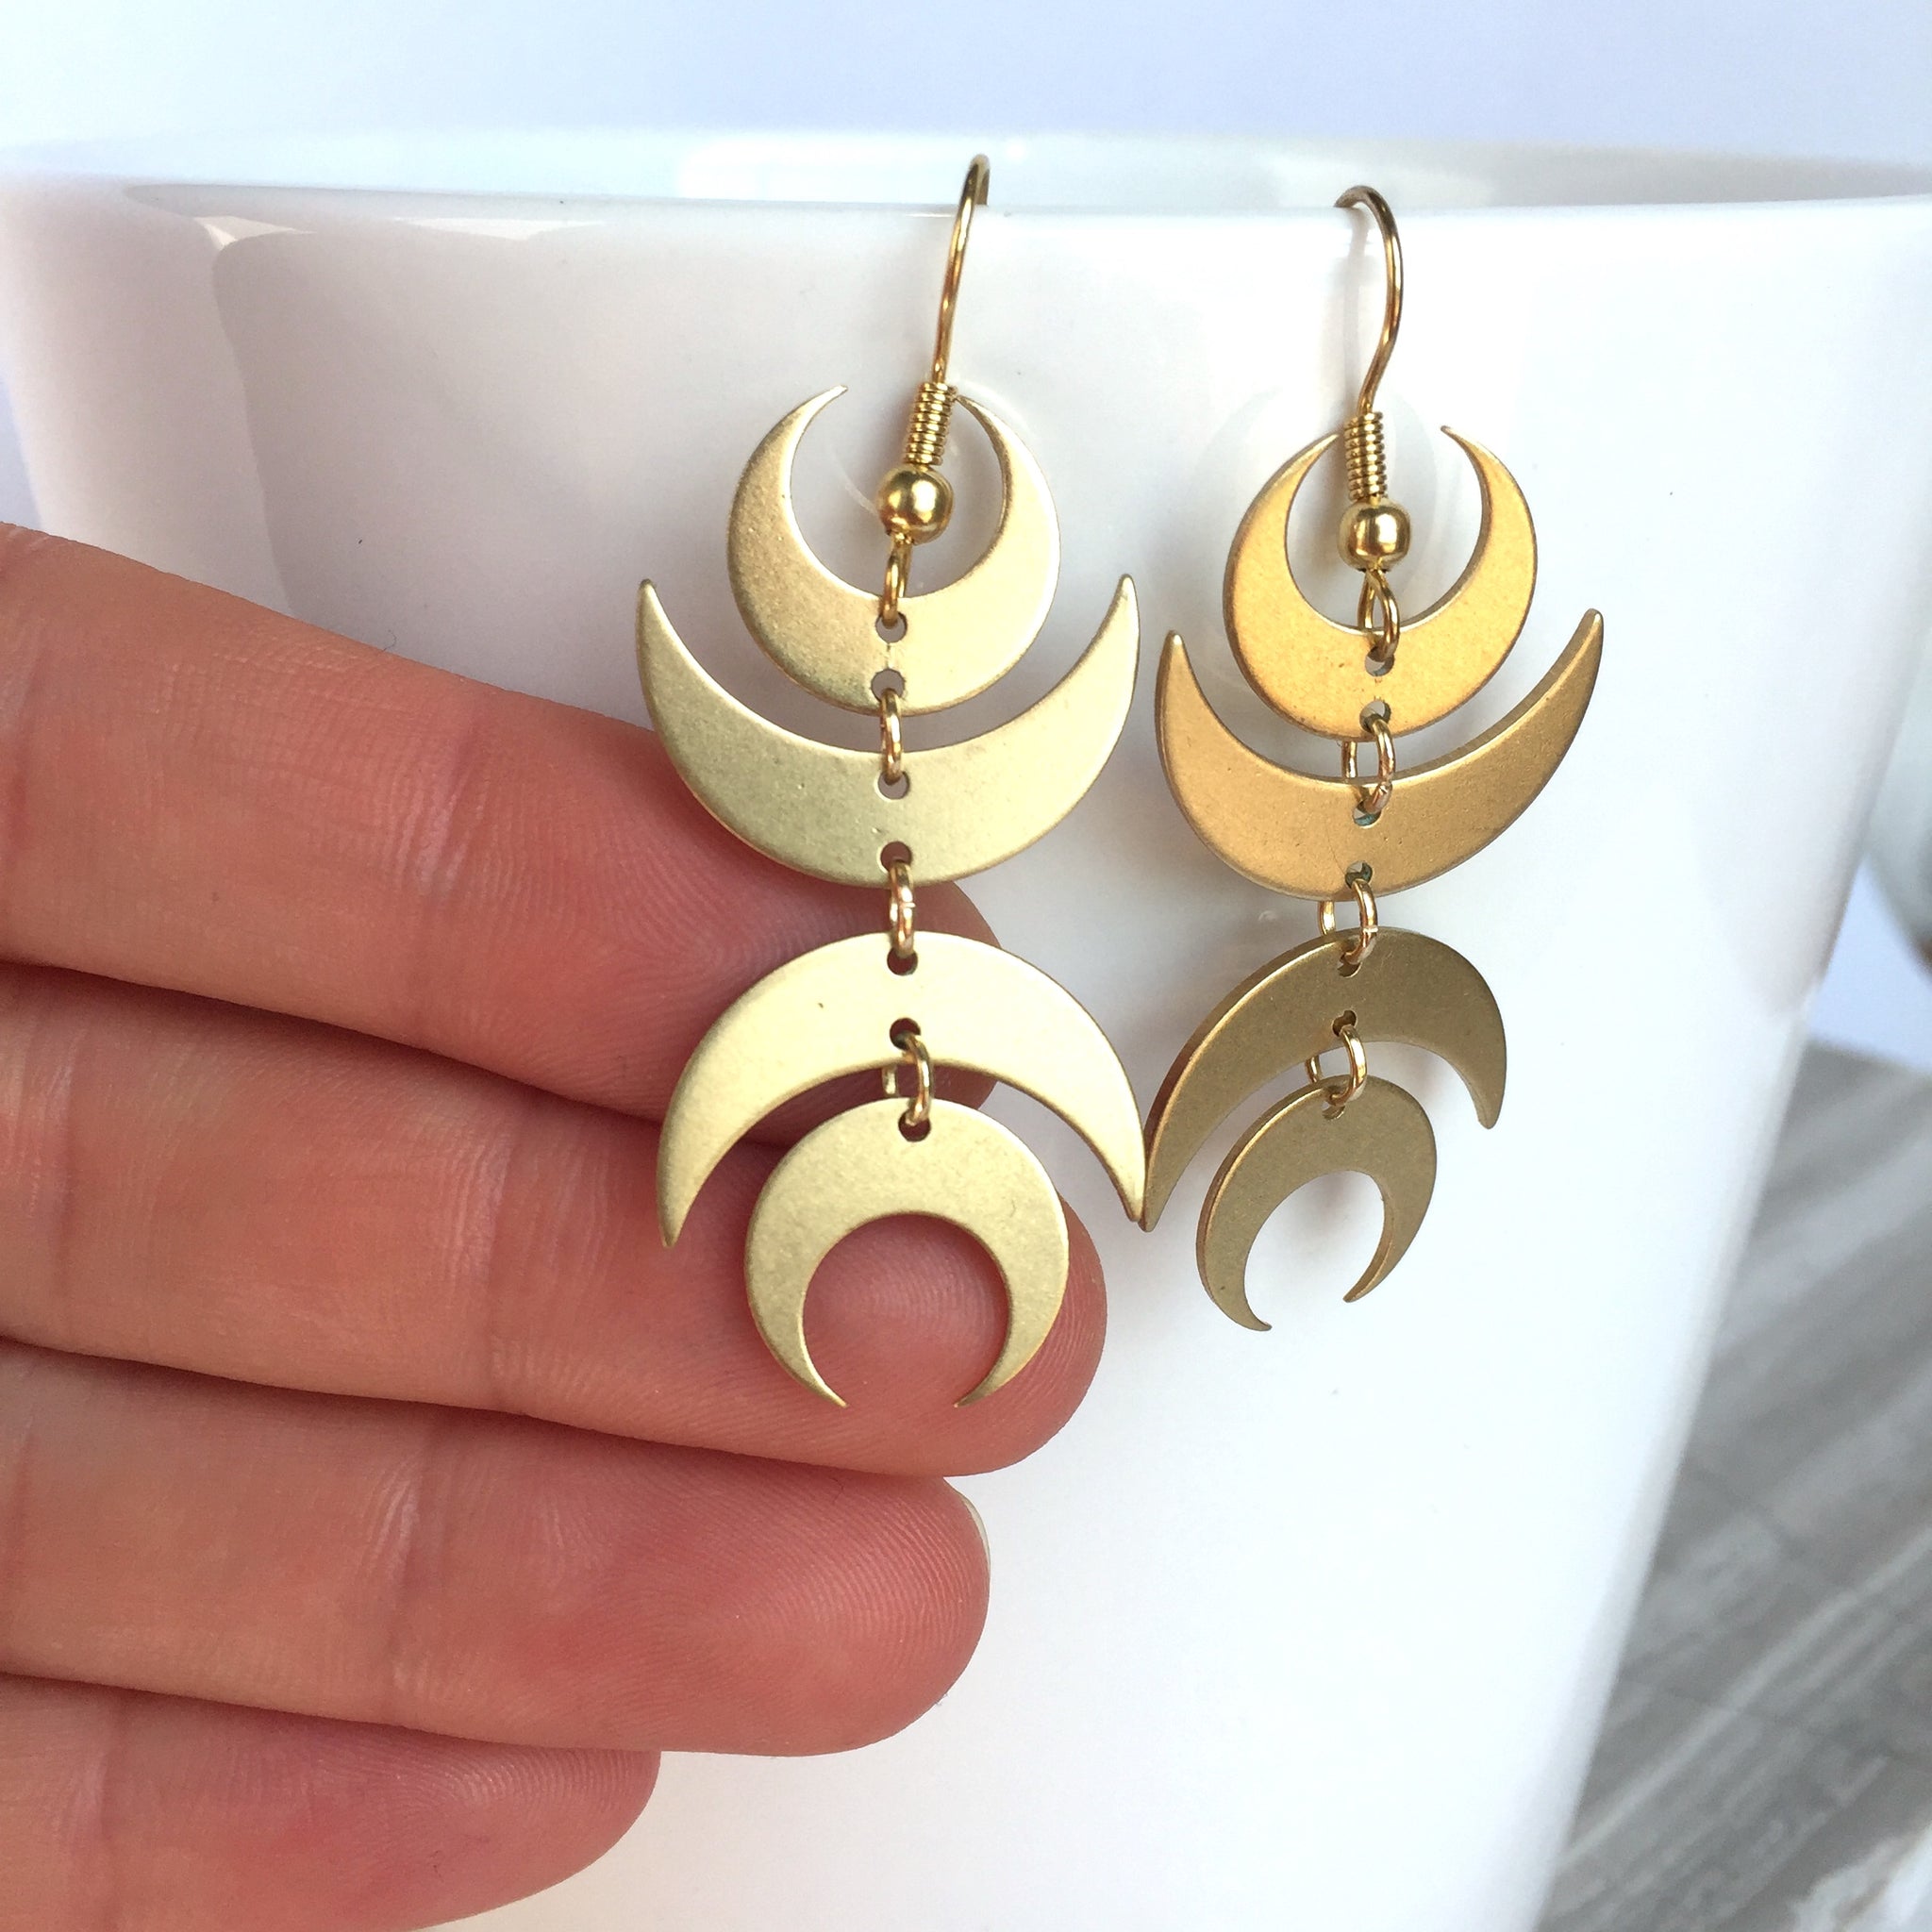 Buy Crescent Moon Stud Earrings. Hypoallergenic Minimalist Dainty Gifts for  Girls, Birthday, Gift for Mom, Small Tiny Studs Silver Earrings. Online in  India - Etsy